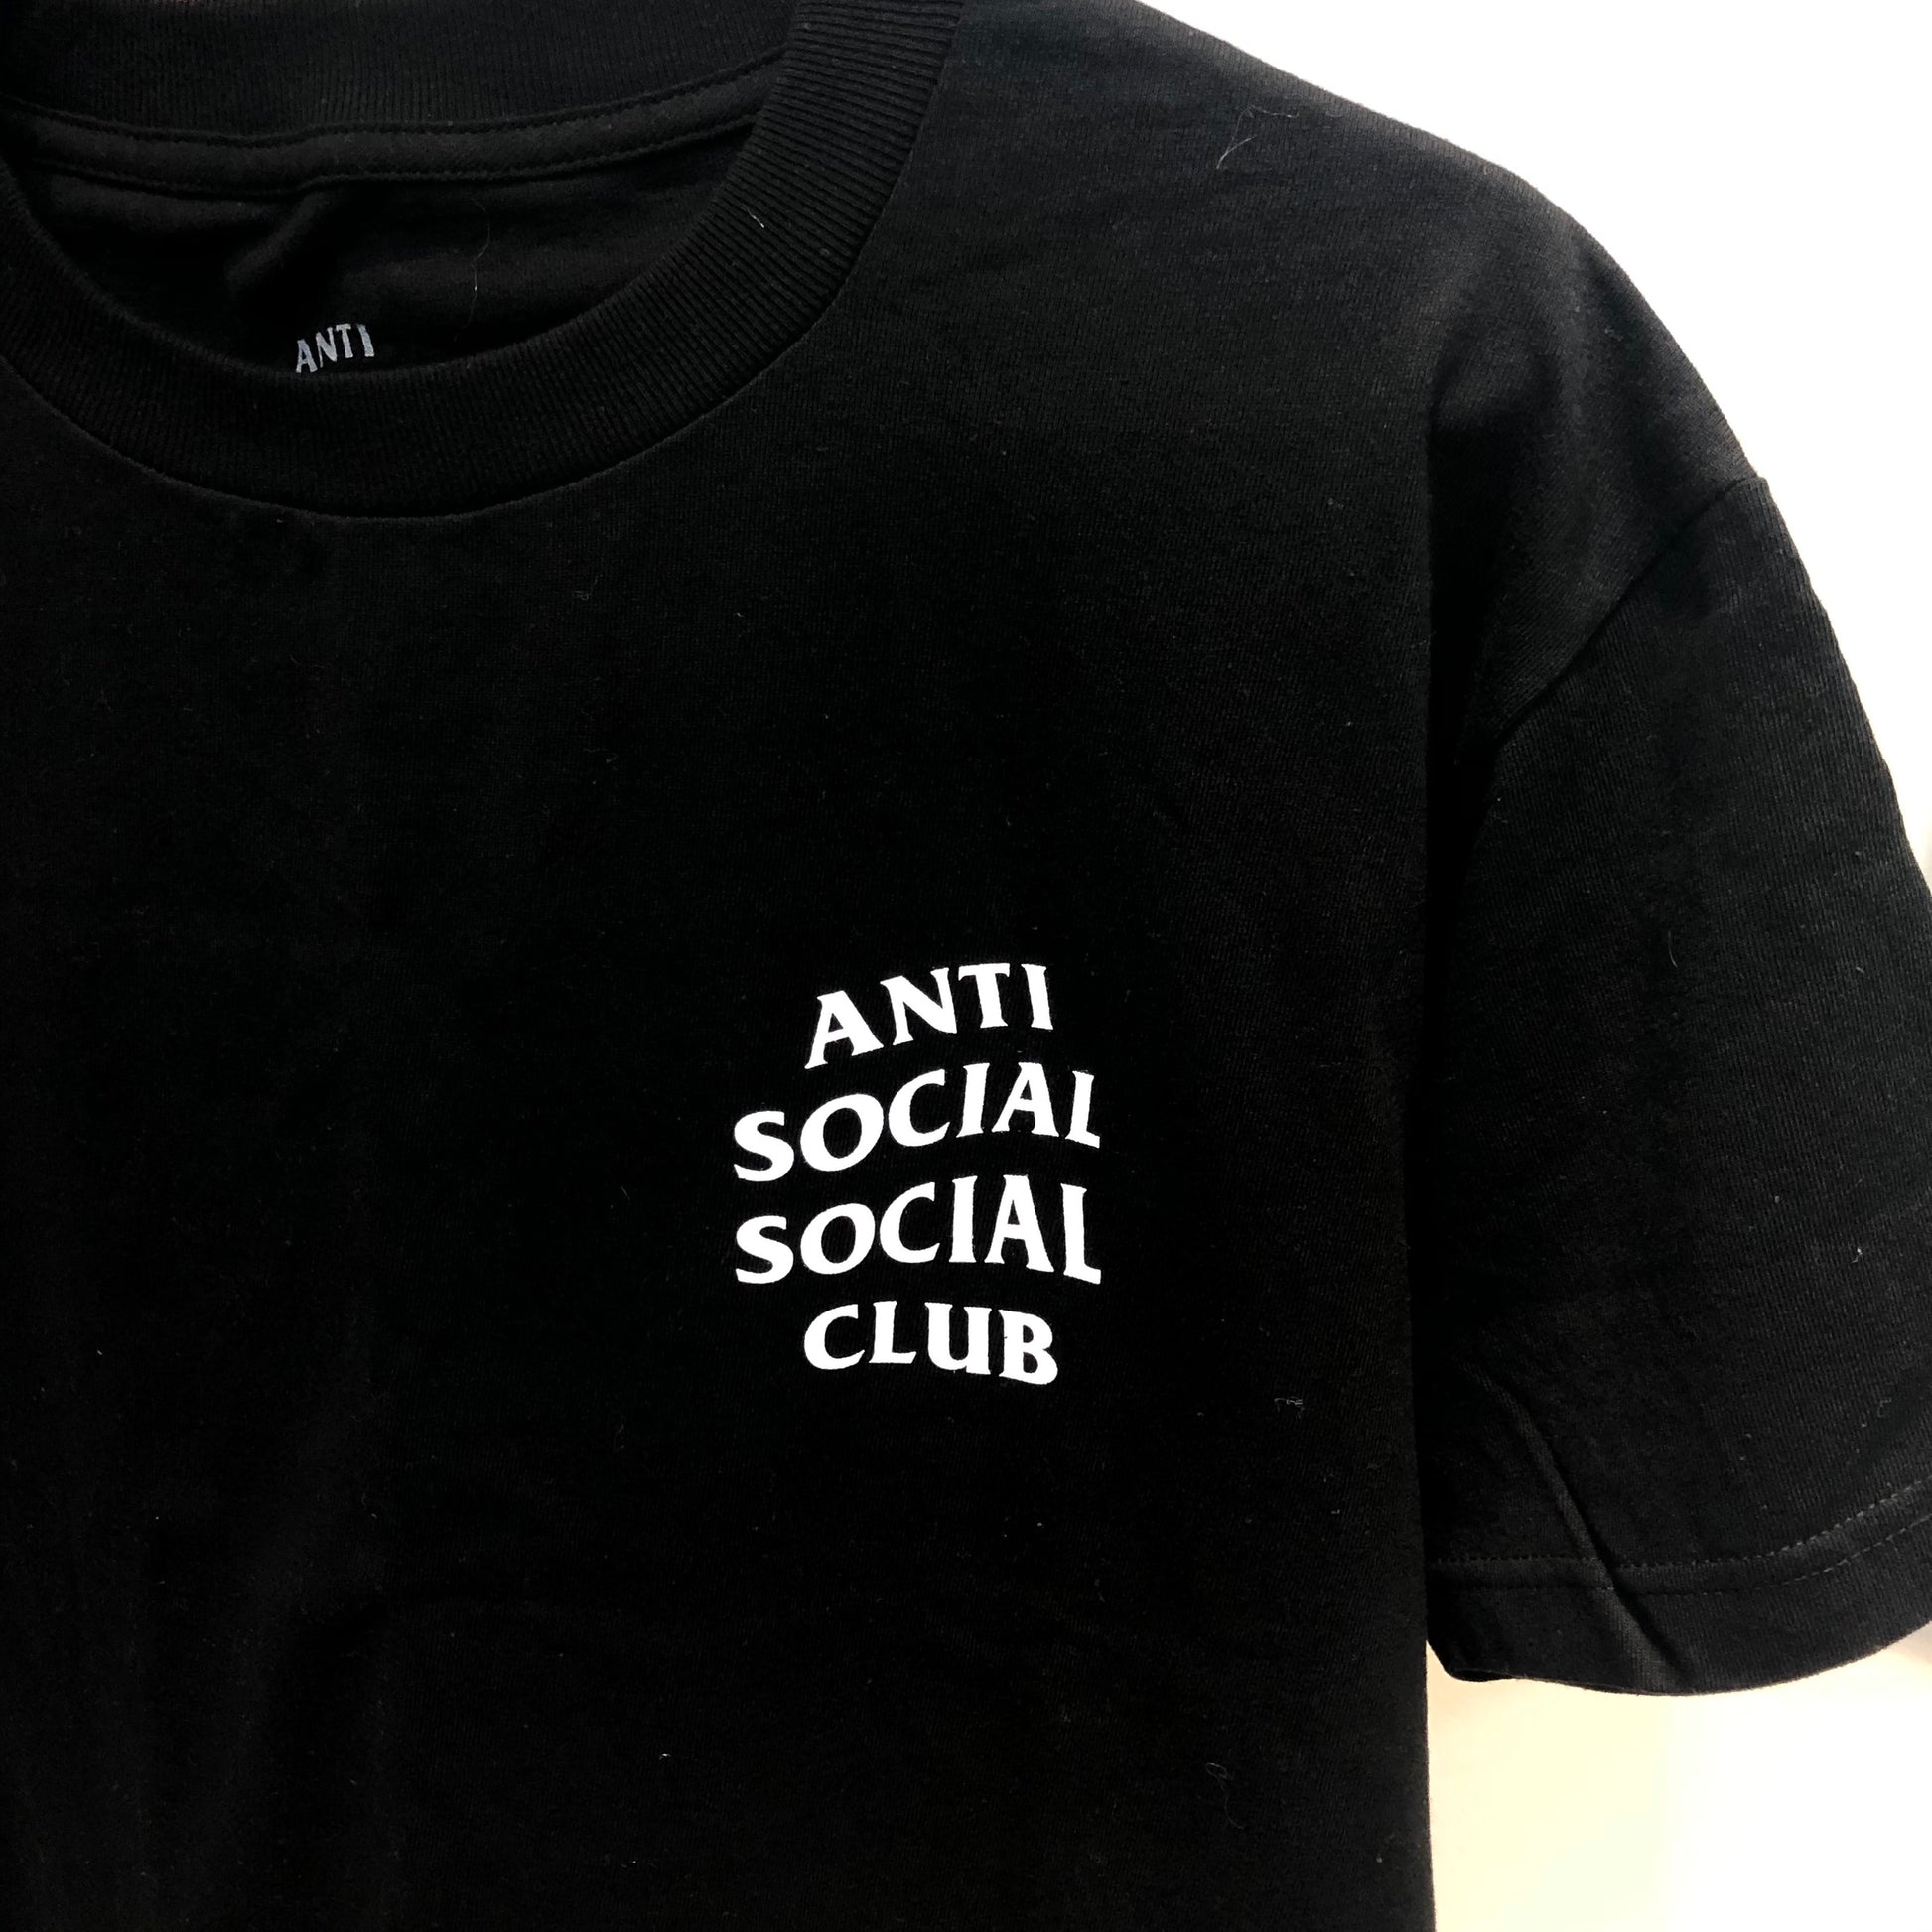 Anti Social Social Club Basic Black Wording Tee - Shop Streetwear, Sneakers, Slippers and Gifts online | Malaysia - The Factory KL